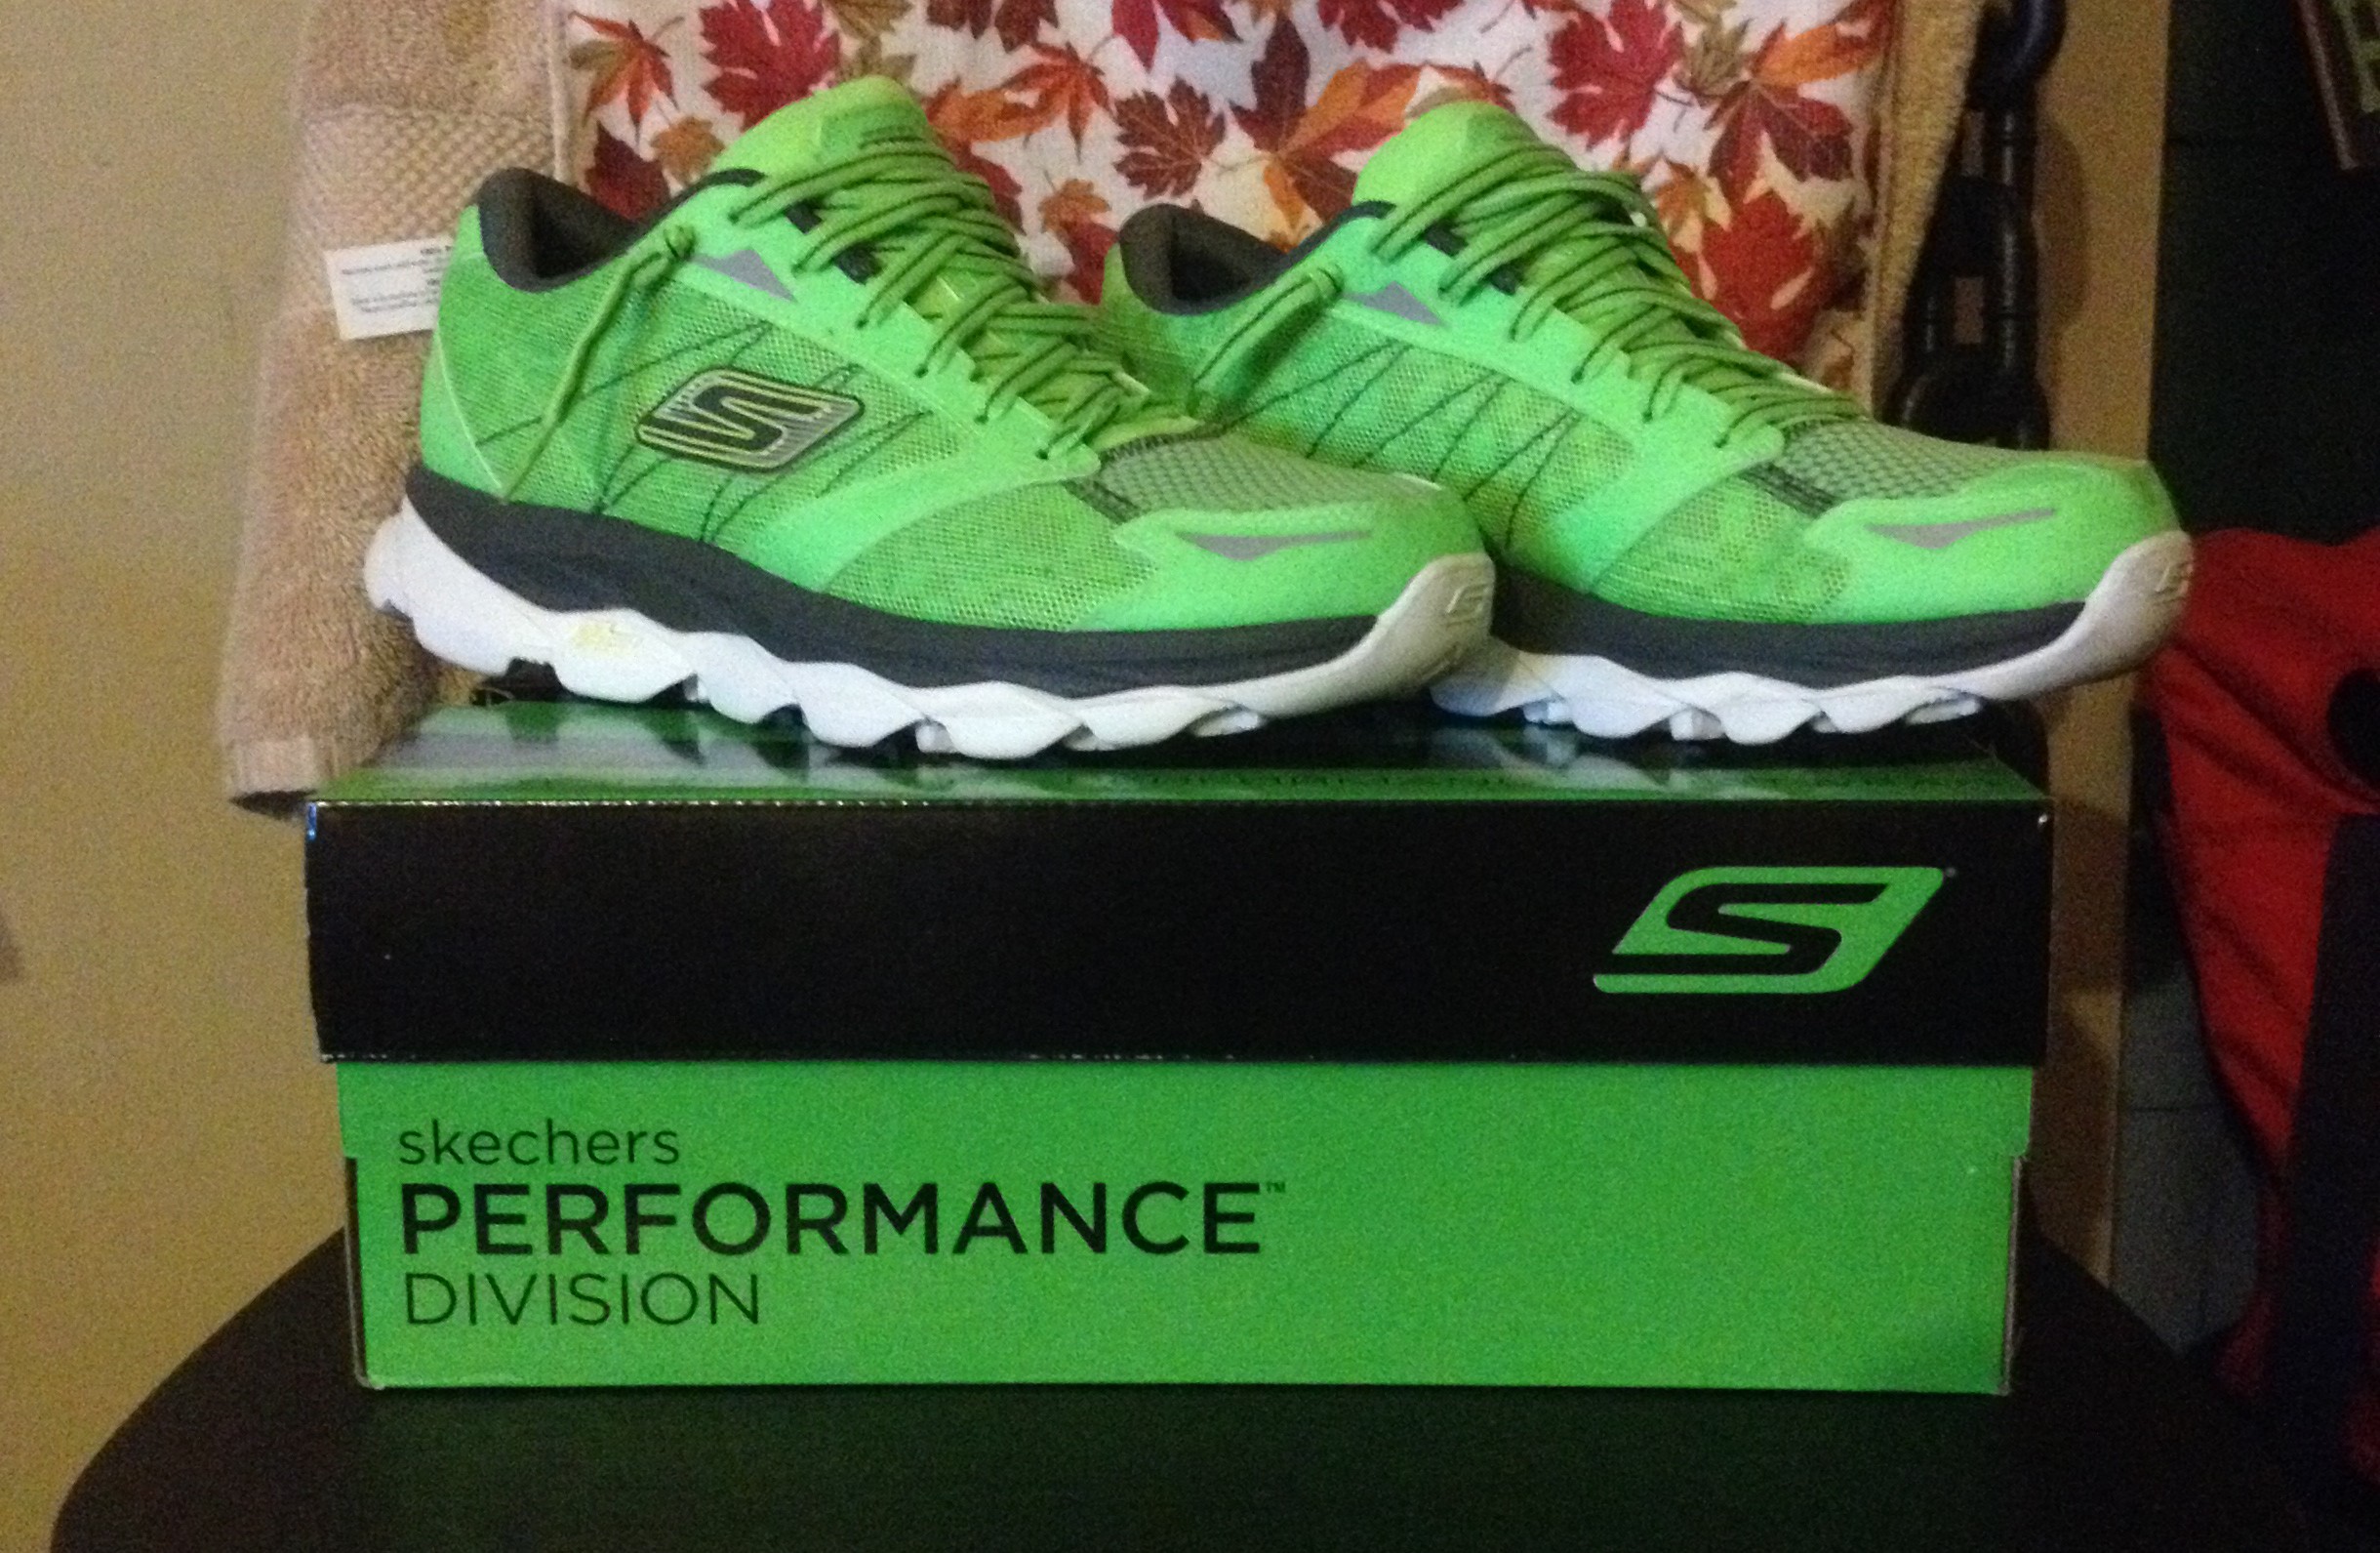 skechers performance division